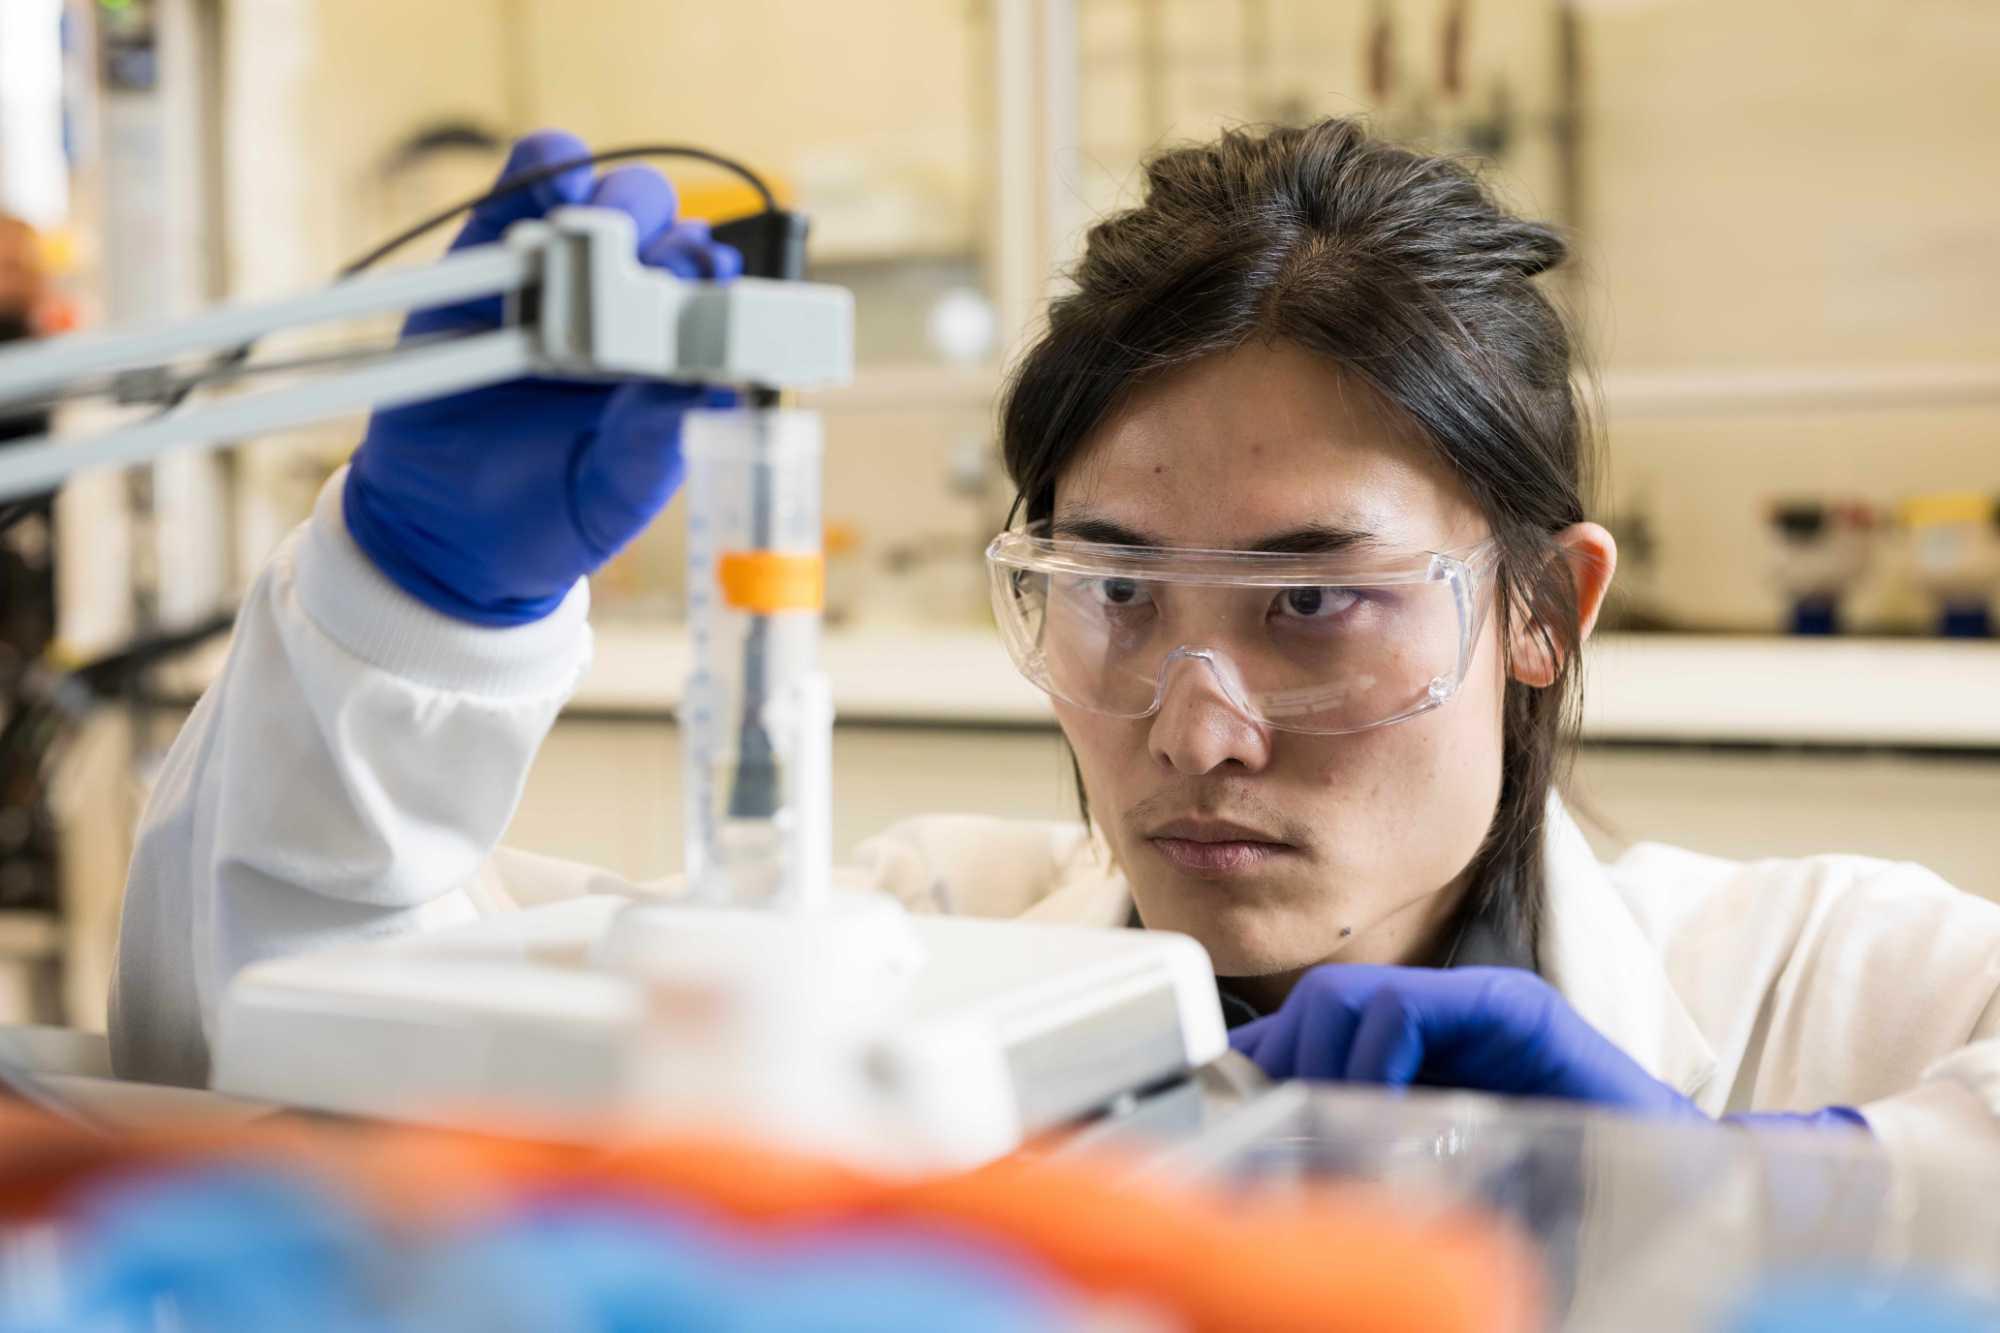 A scientist wearing lab googles and gloves examines a beaker of water containing PFAS chemicals.